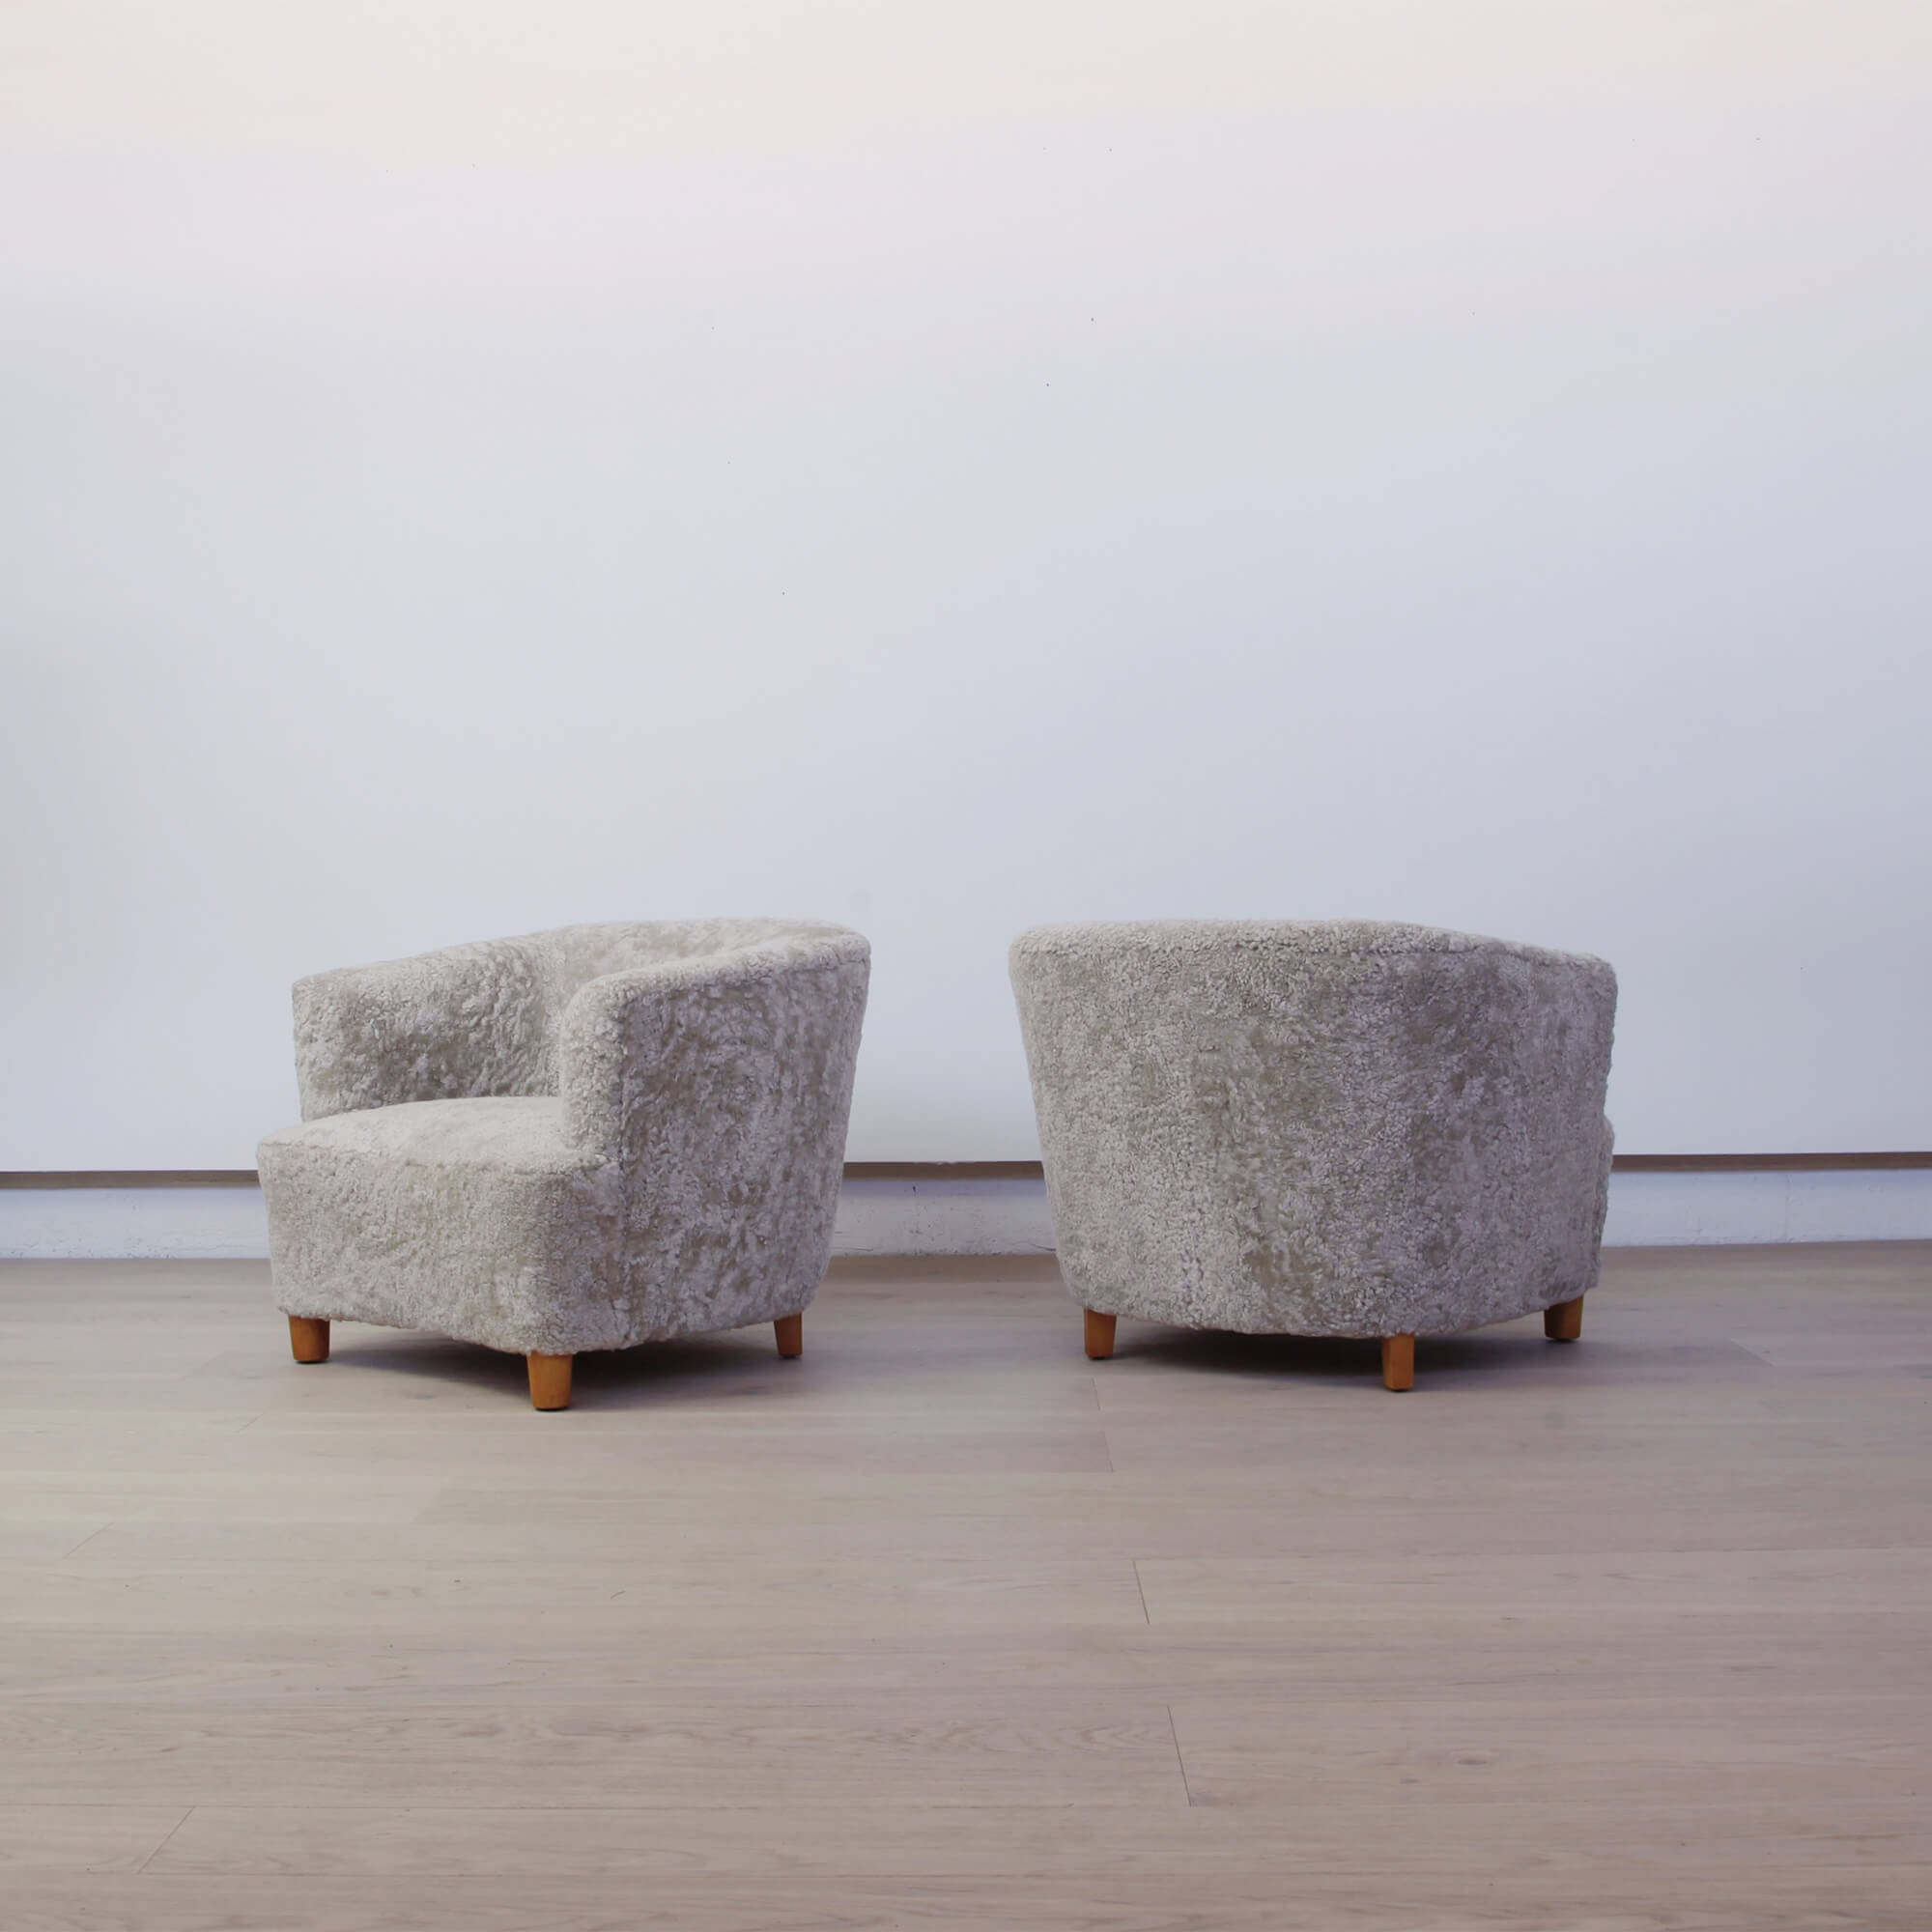 Pair of Shearling-Upholstered Barrel-back chairs by Otto Schulz for Boet